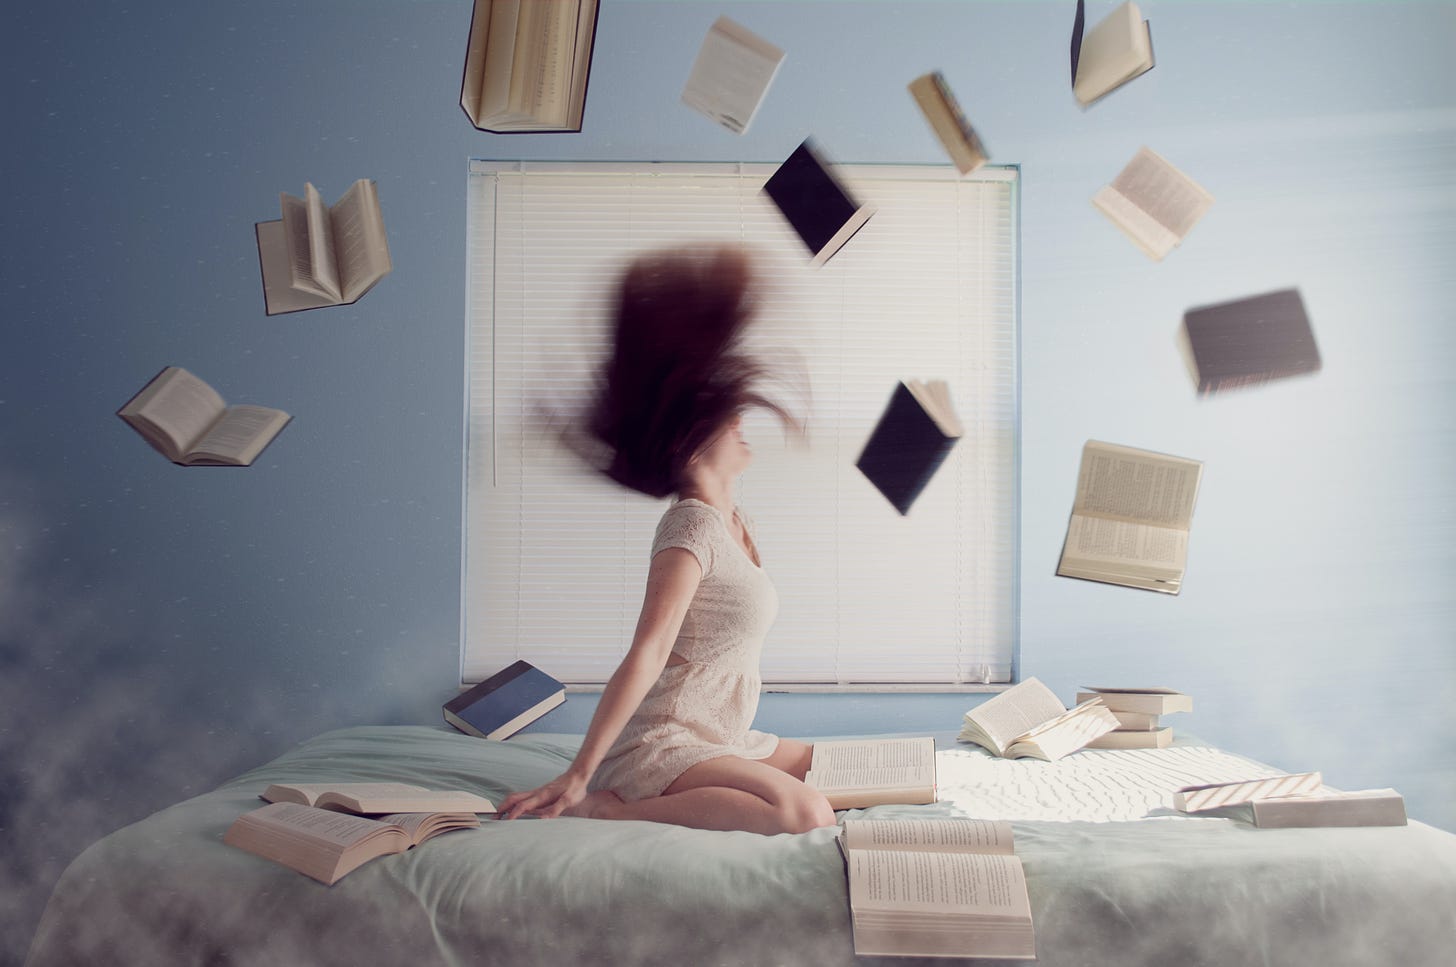 A white girl kneels on a bed. She is in motion, her hair whipping around her face, and books are flying in the air around her.